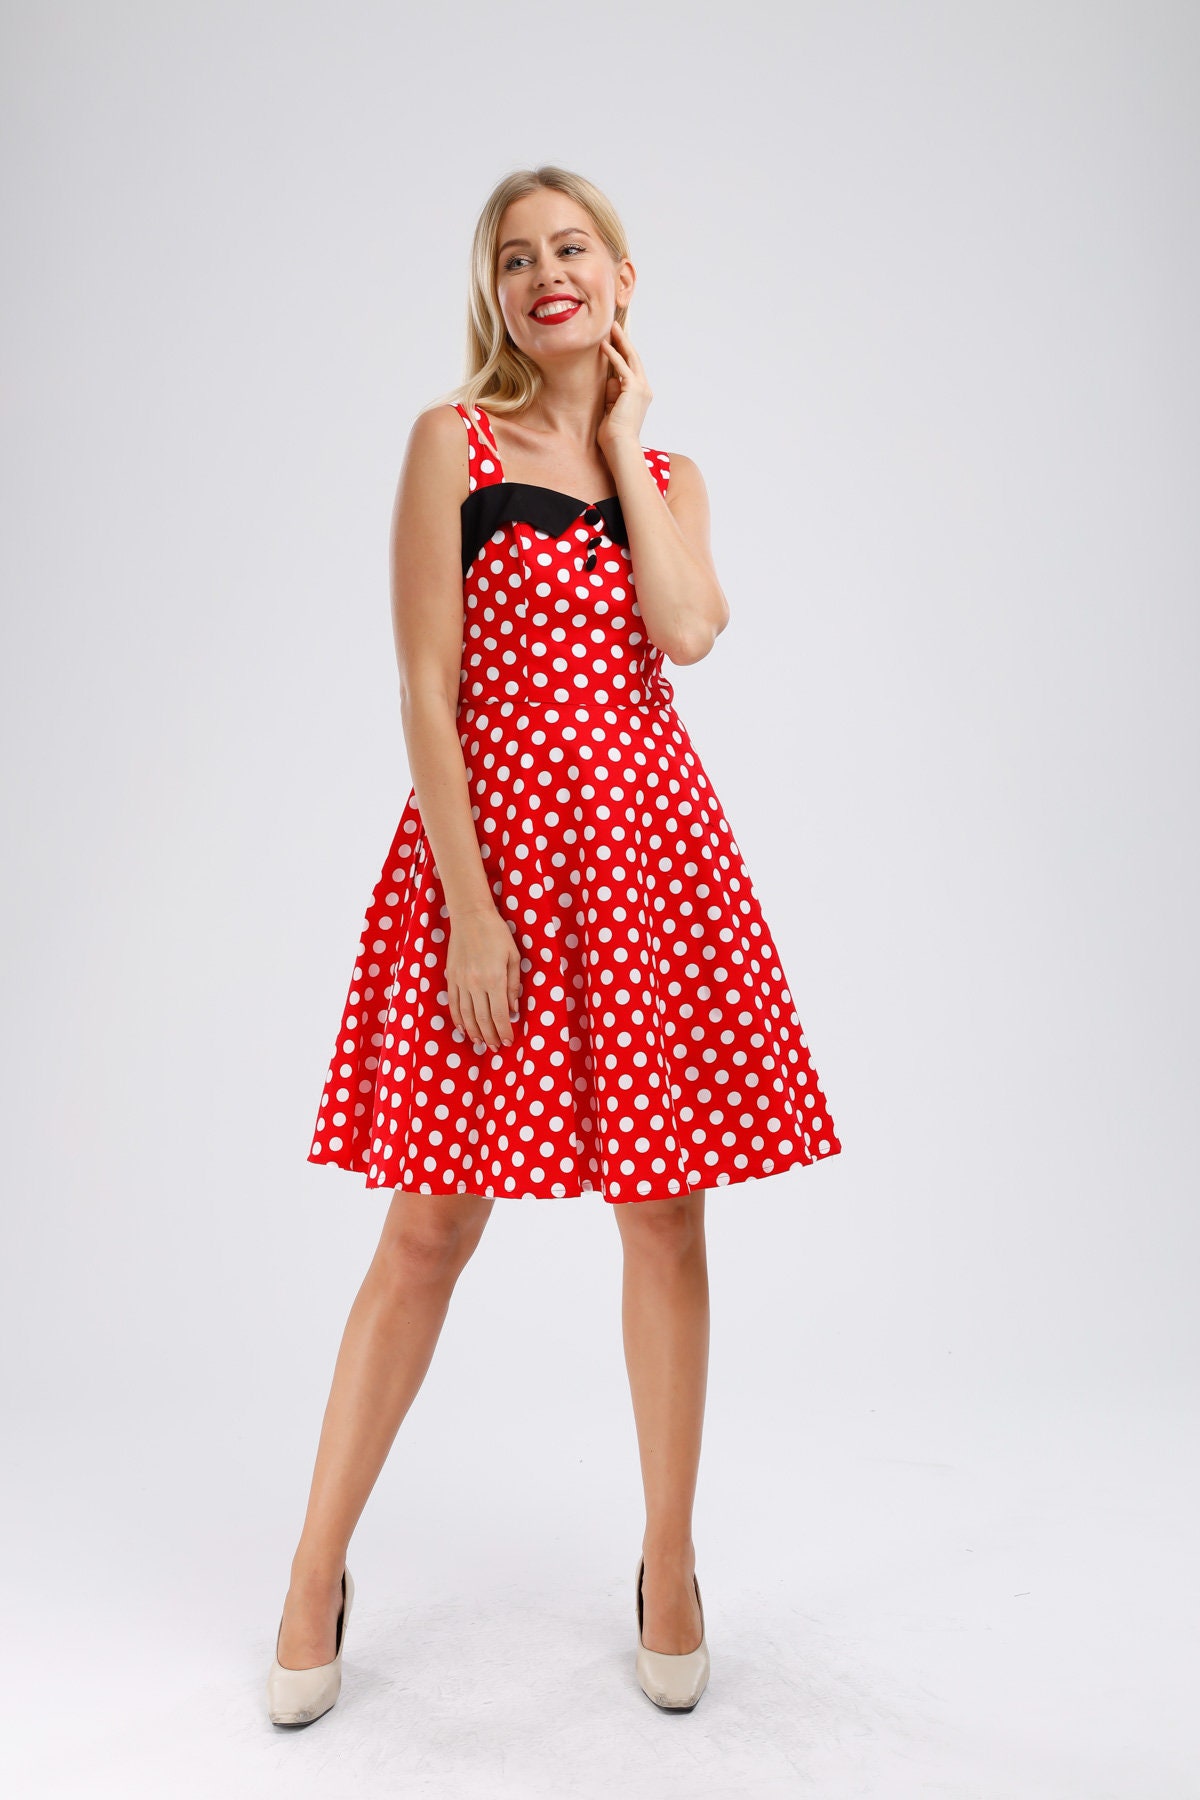 Minnie Mouse Dress Disney Dress Mickey Mouse Red Polka Dots